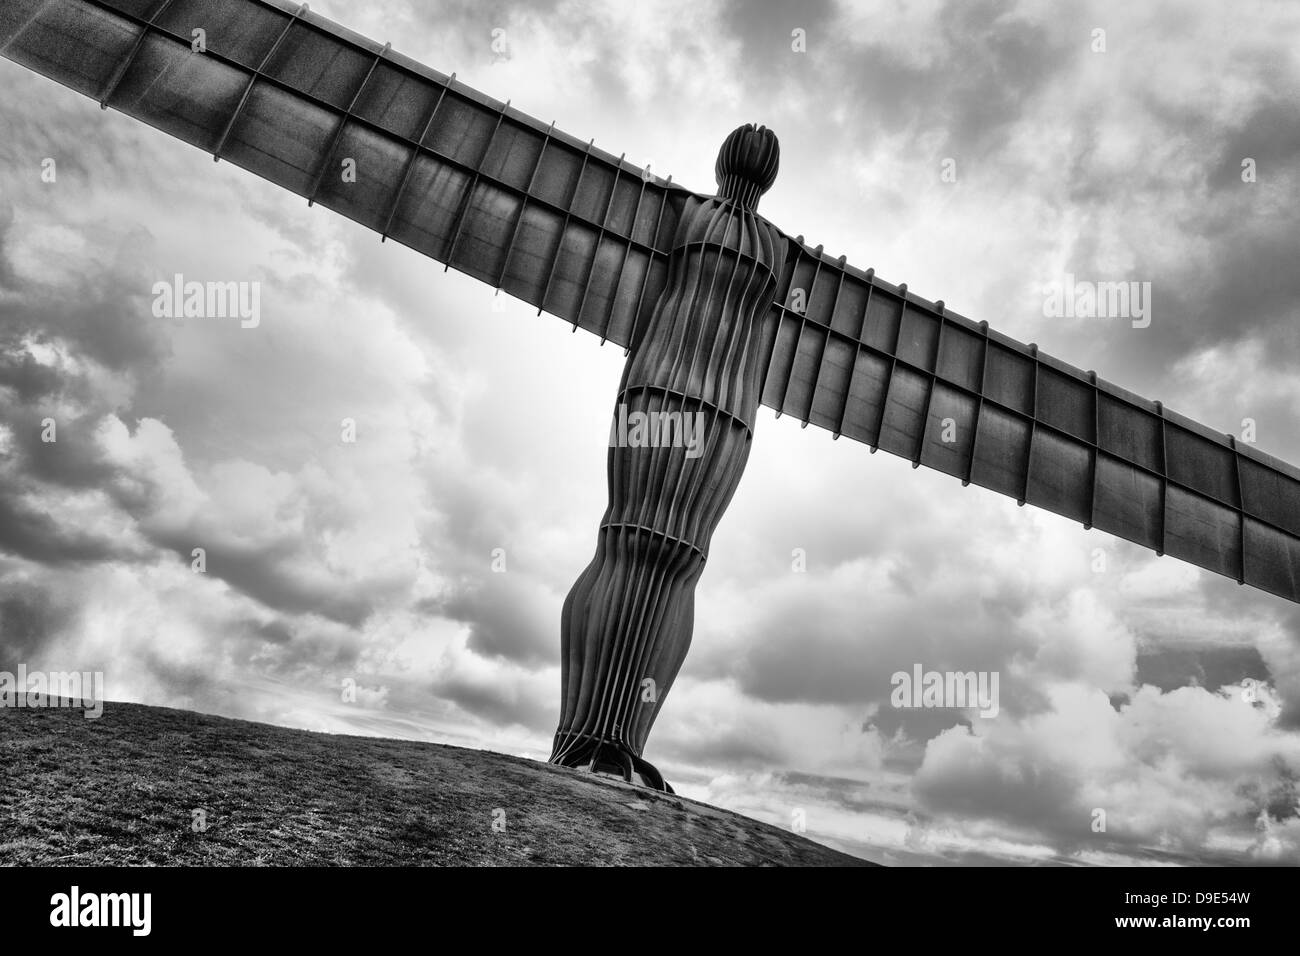 Angel of the North. Antony Gormley's 20 metre tall iconic work at Gateshead, Tyne and Wear, England, close to the A1 Stock Photo